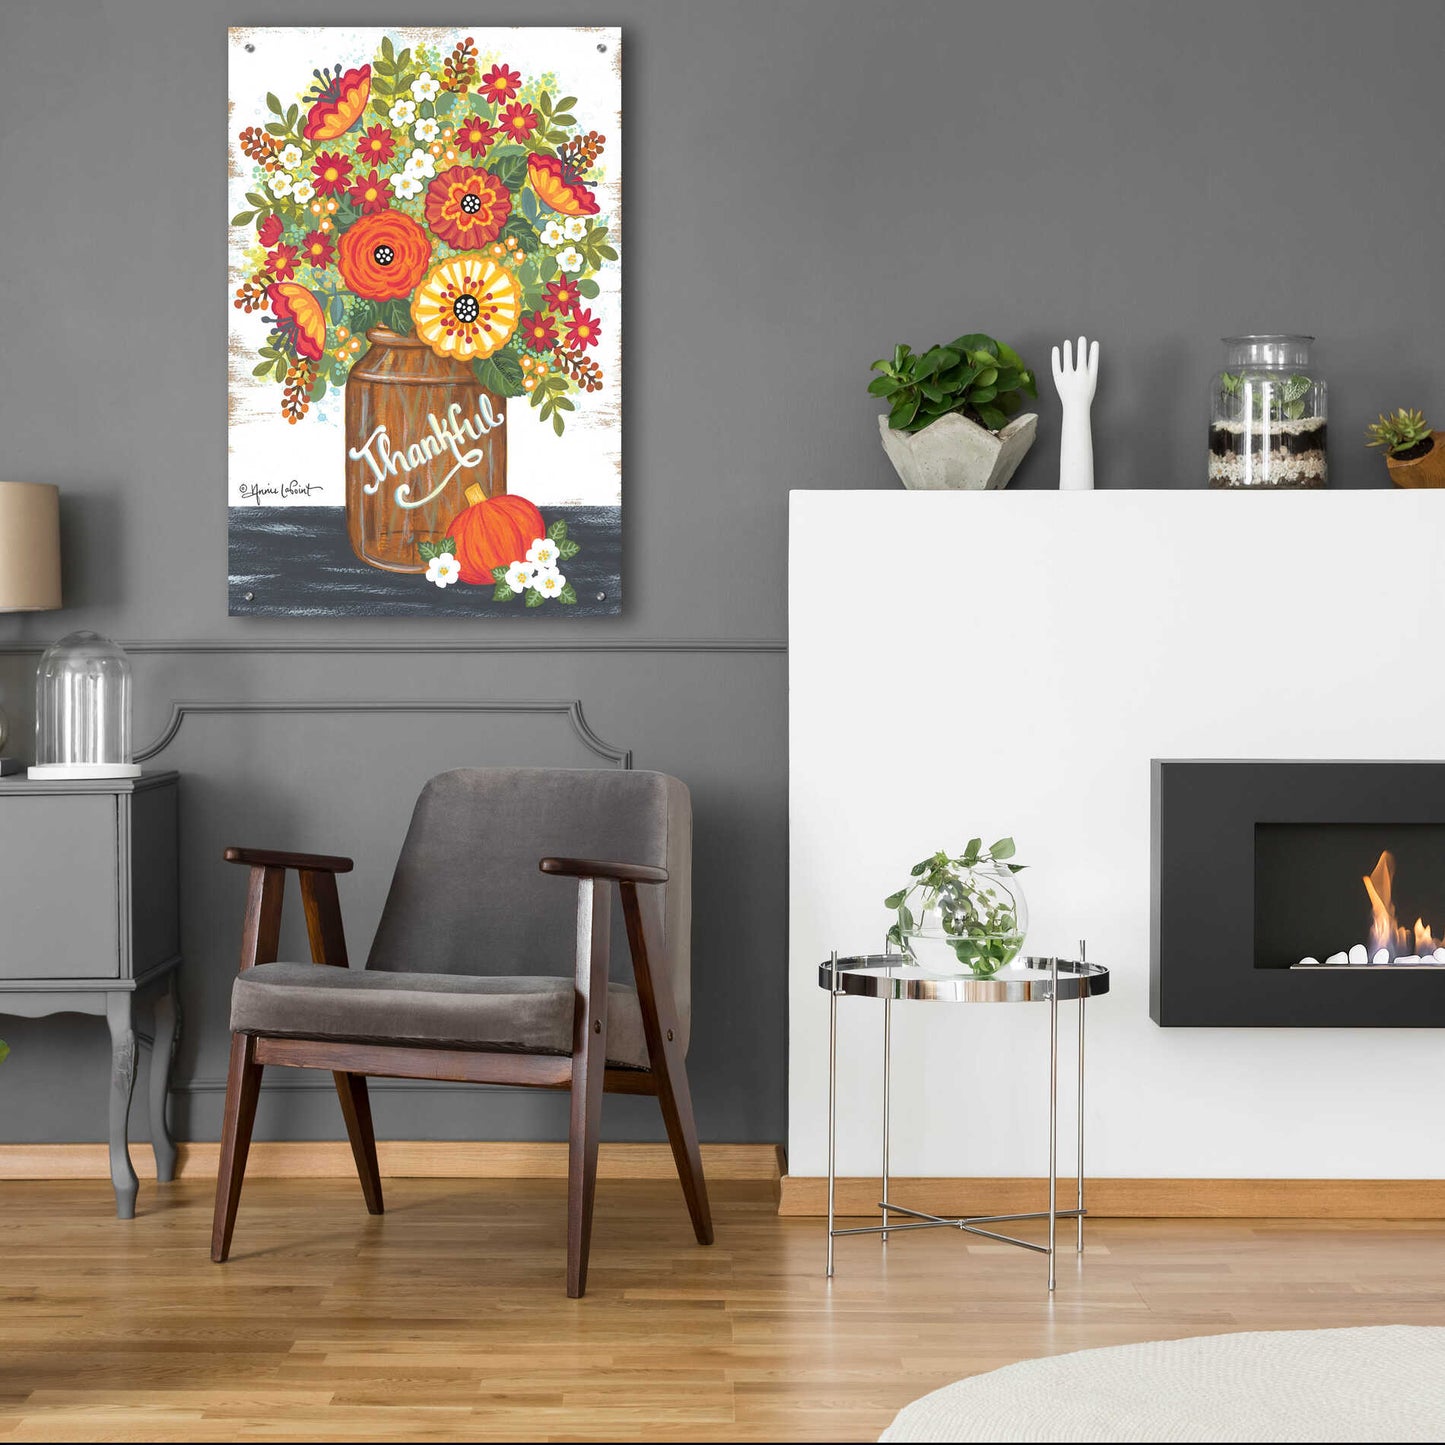 Epic Art 'Thankful Bouquet' by Annie LaPoint, Acrylic Glass Wall Art,24x36